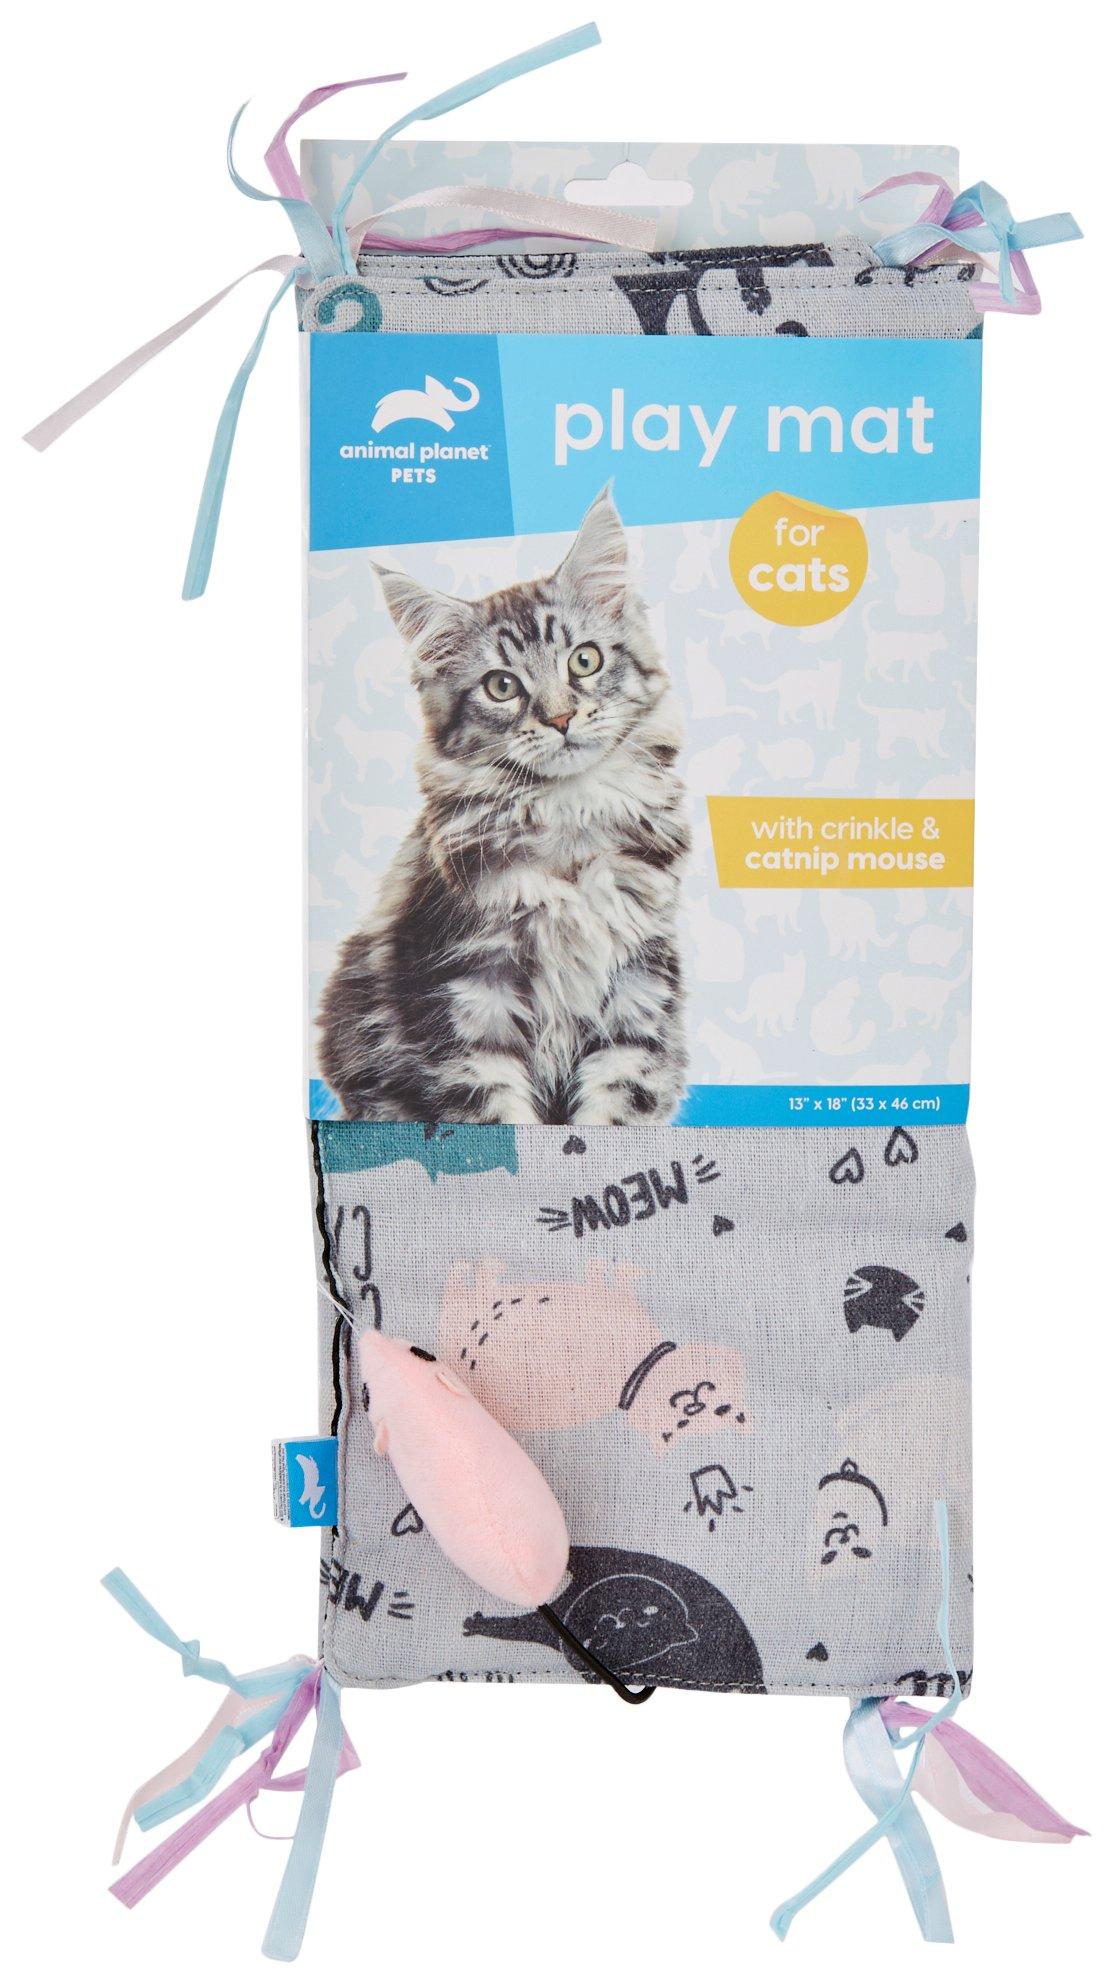 Cat mat, interactive cat play mat, cat play mat for smart toys with your cat,  size 100 x 100 cm 1 piece (gray)